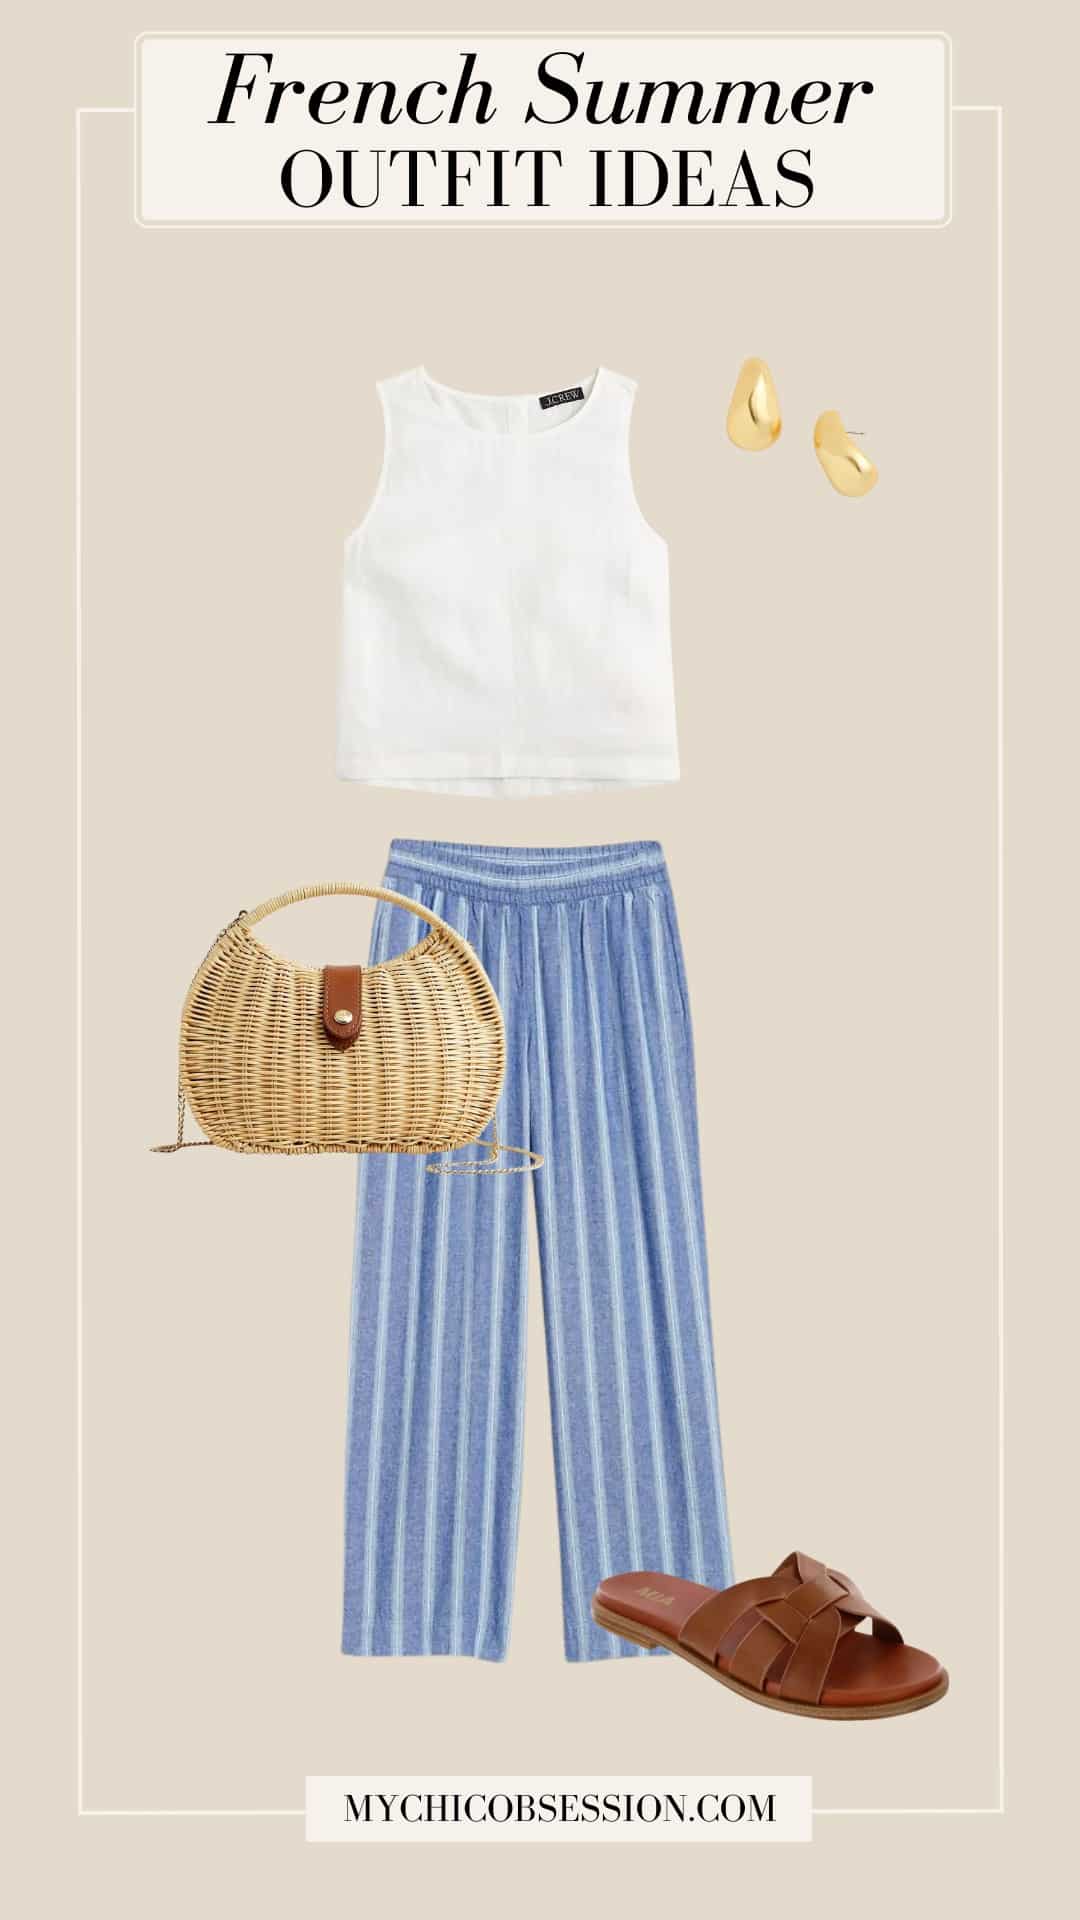 french summer outfit - woven bag linen tank linen striped pants